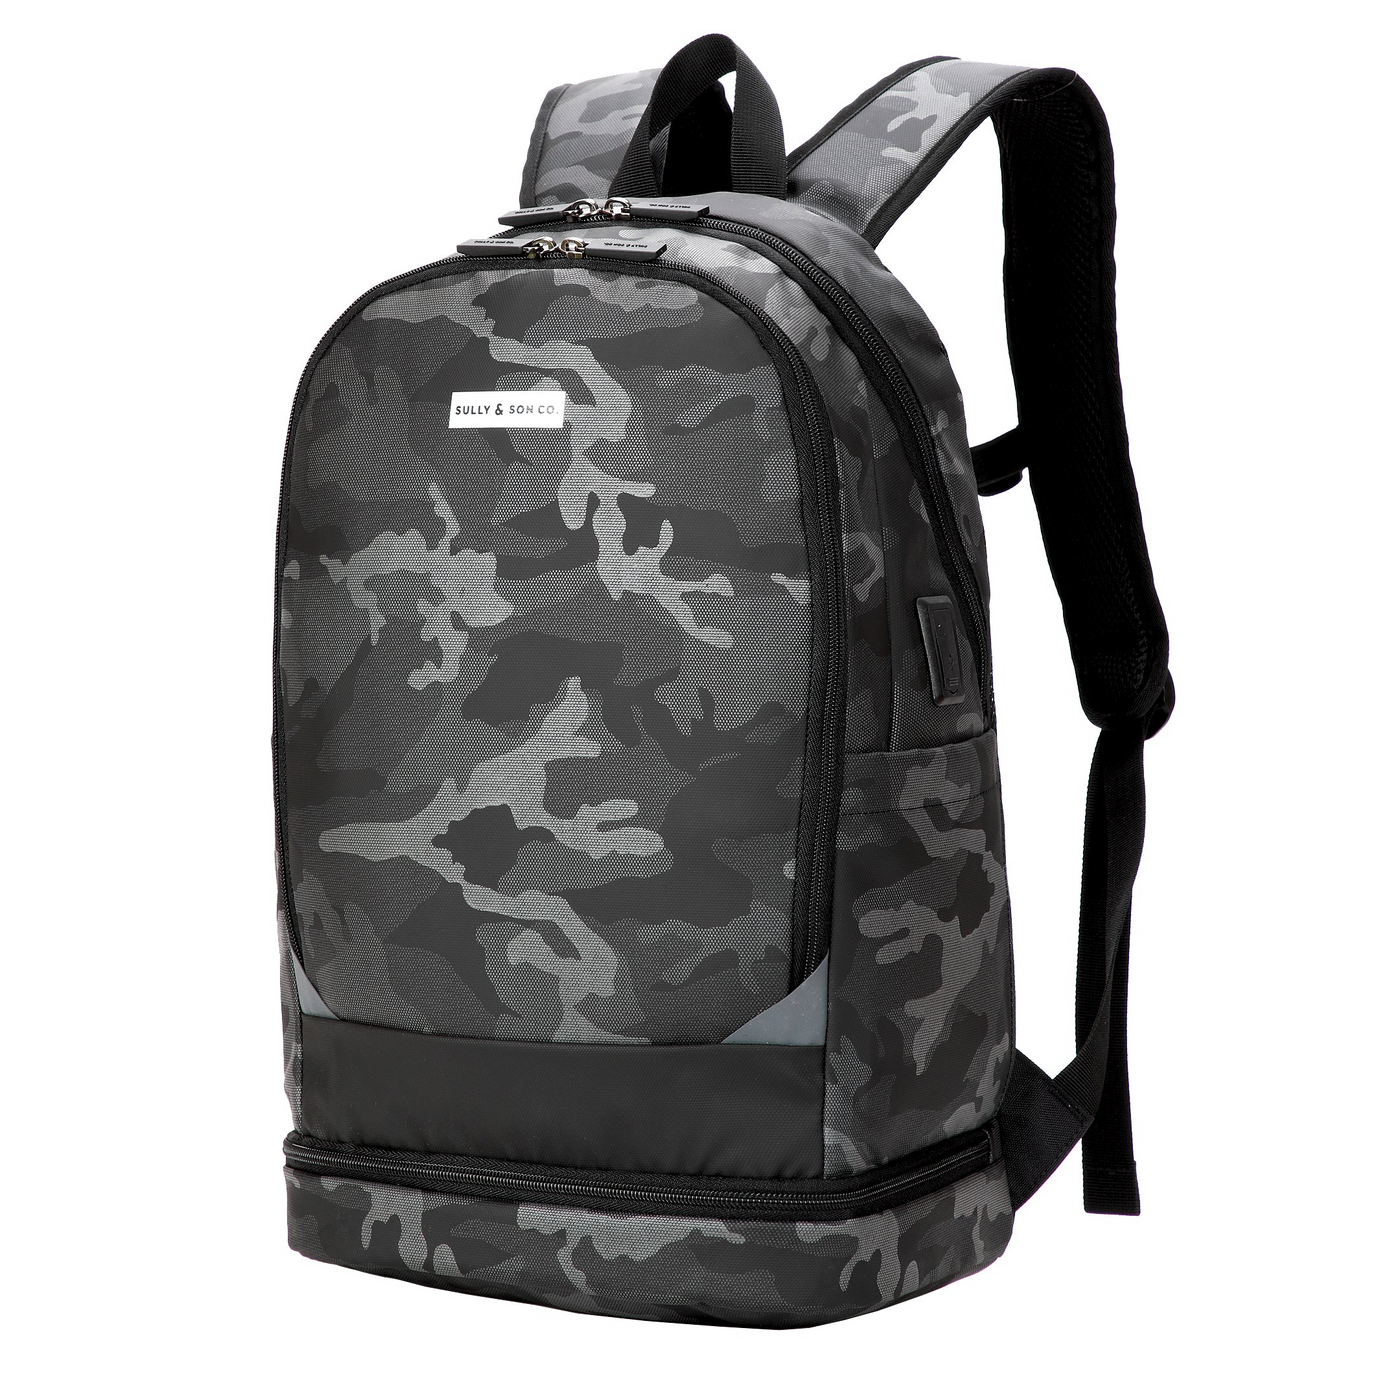 Gotstyle Fashion - Sully & Son Co. Bags Camo Backpack - Black